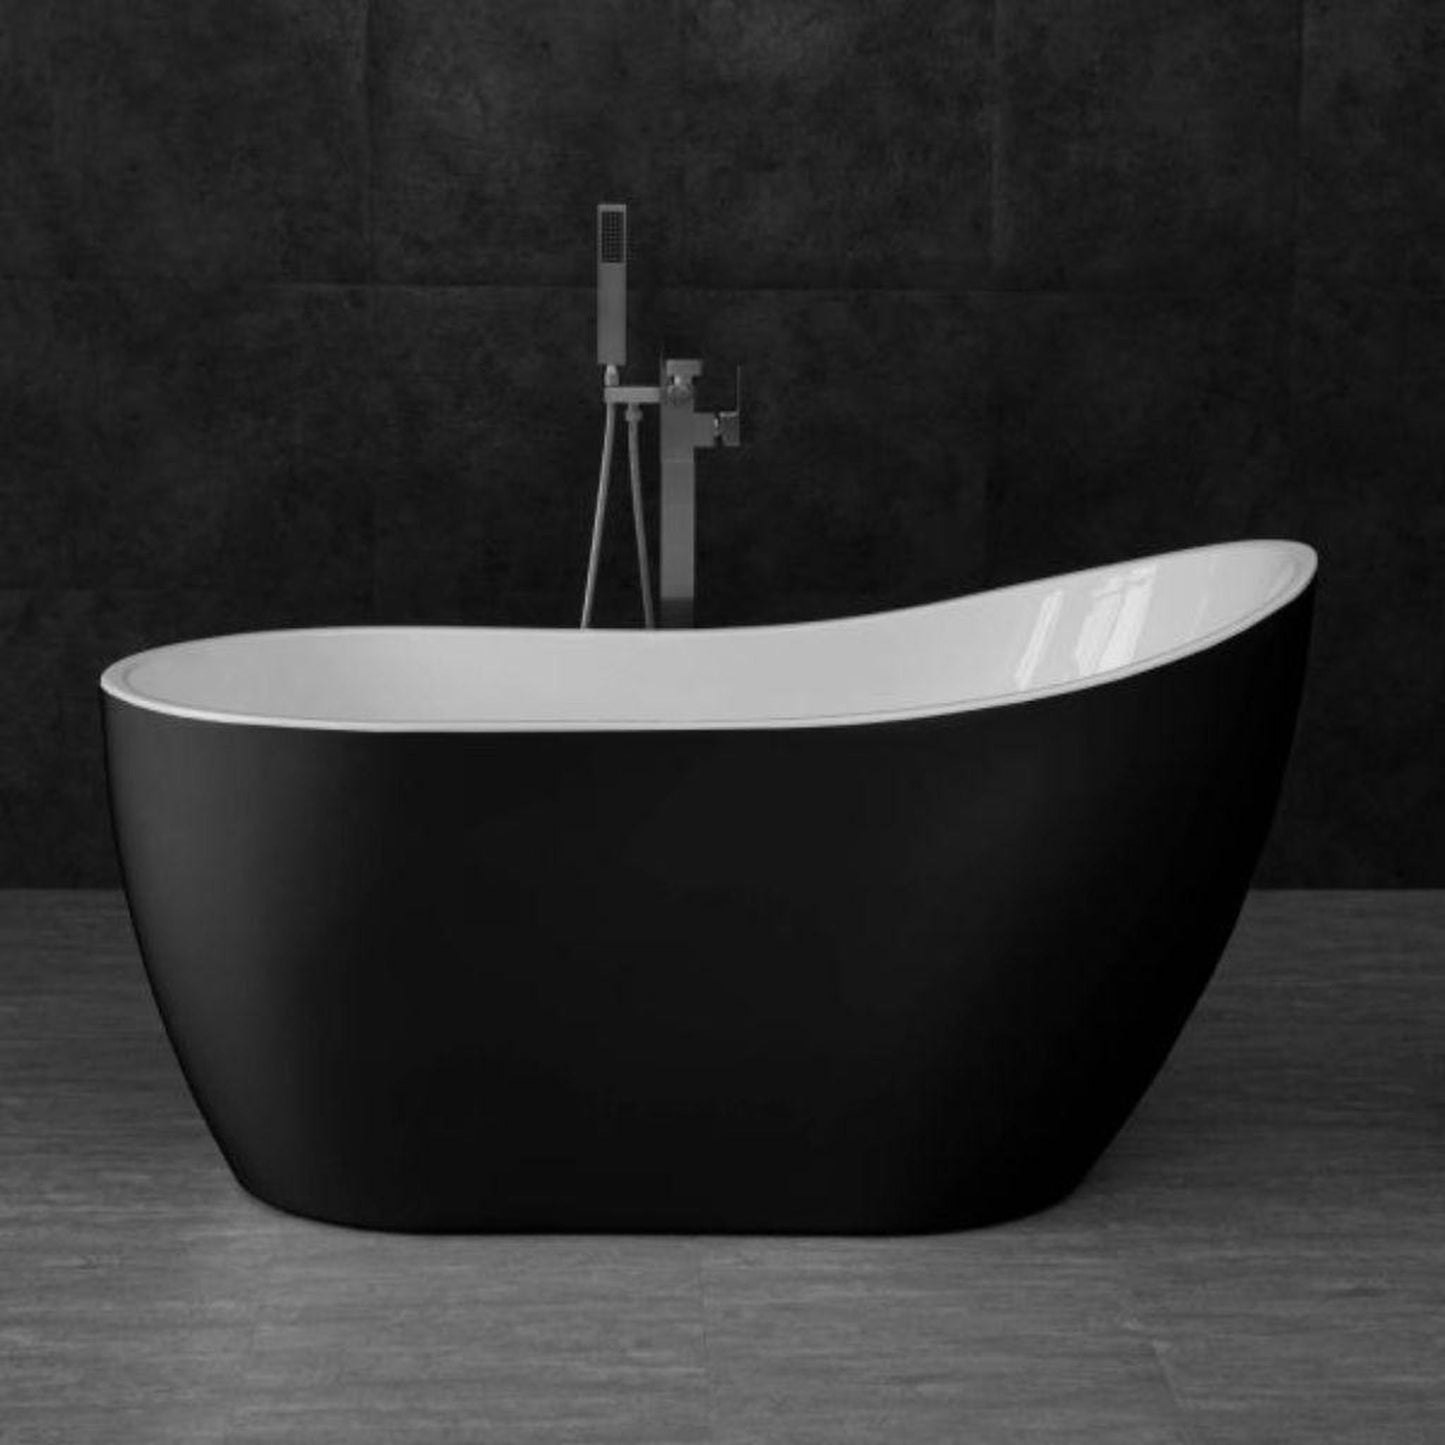 WoodBridge B1807 54" Black Acrylic Freestanding Contemporary Soaking Tub With Brushed Nickel Overflow and Drain